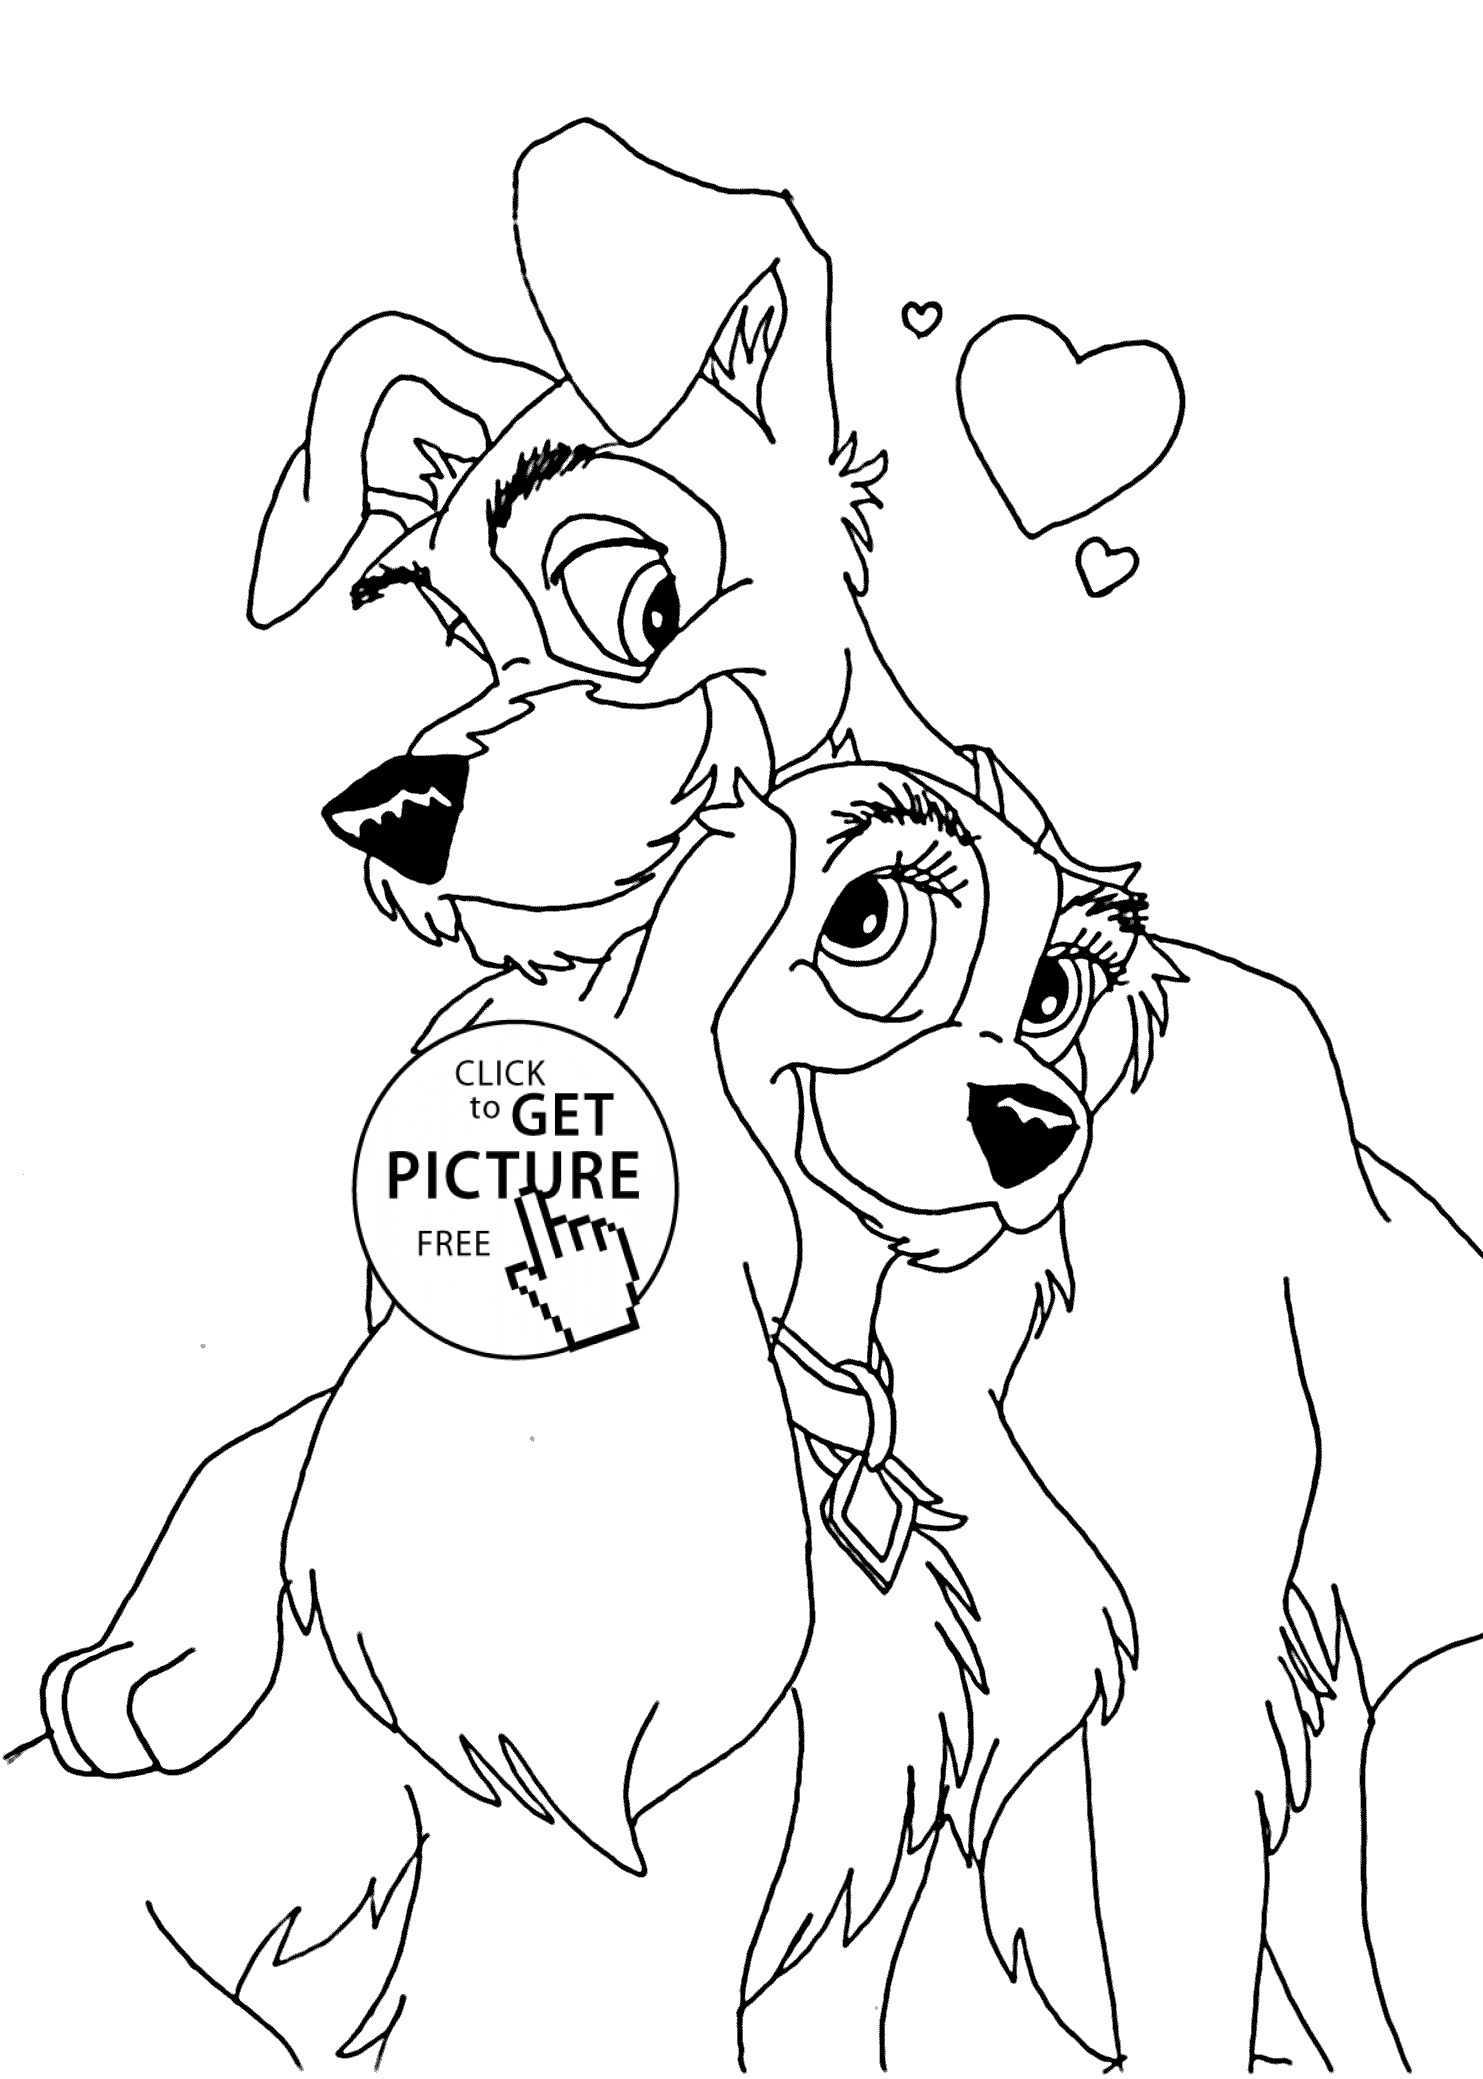 Lady And The Tramp Coloring Pages
 LOVE coloring pages for kids printable free Lady and